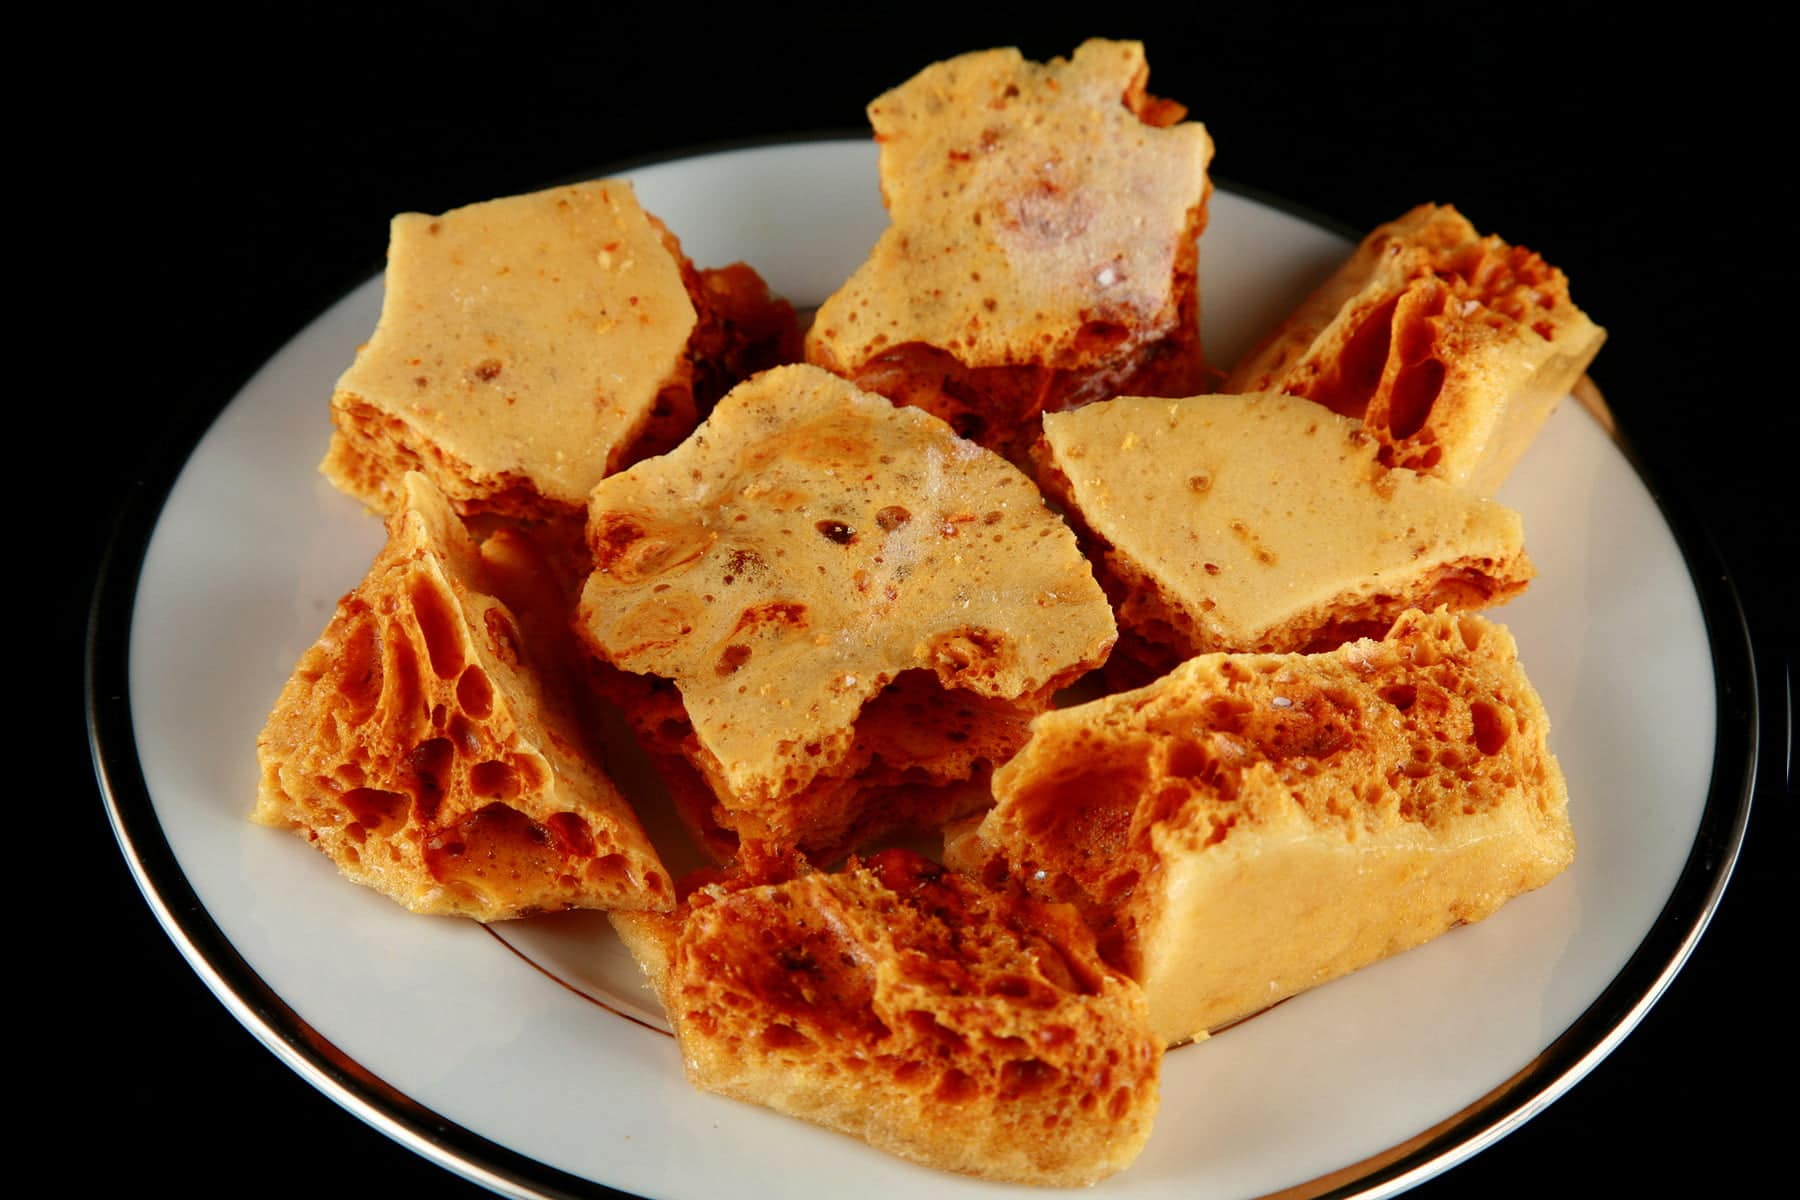 Close up view of a plate of golden sponge toffee chunks.